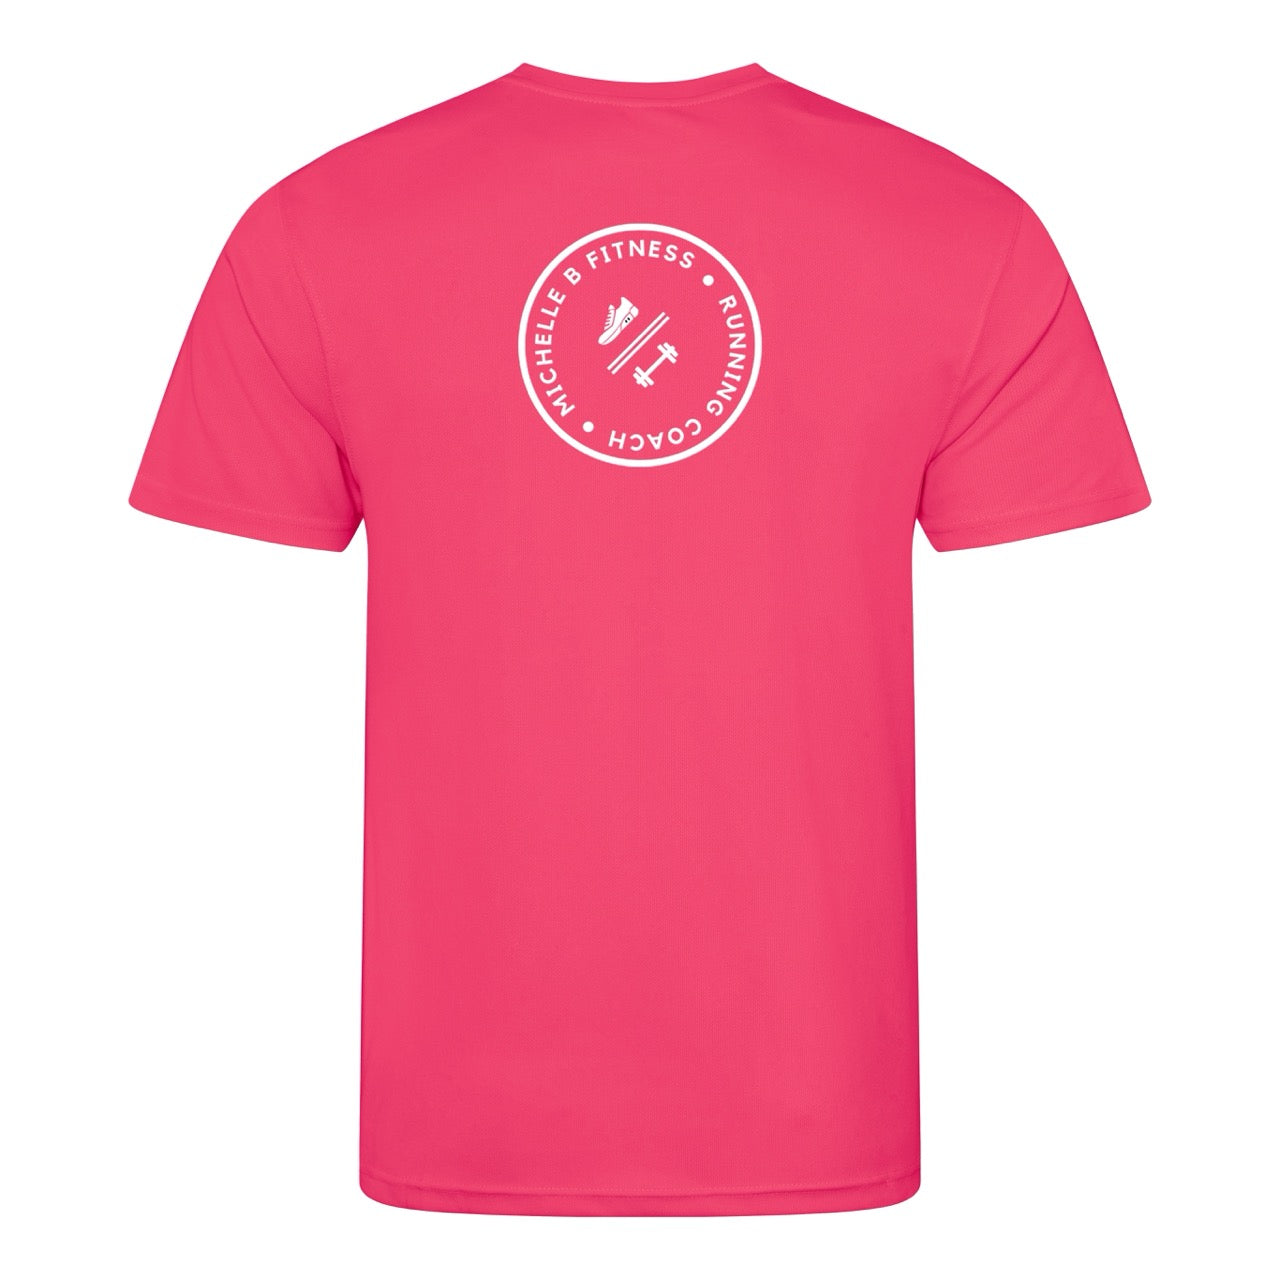 Michelle B Fitness Technical Tee - Hot Pink or Orange